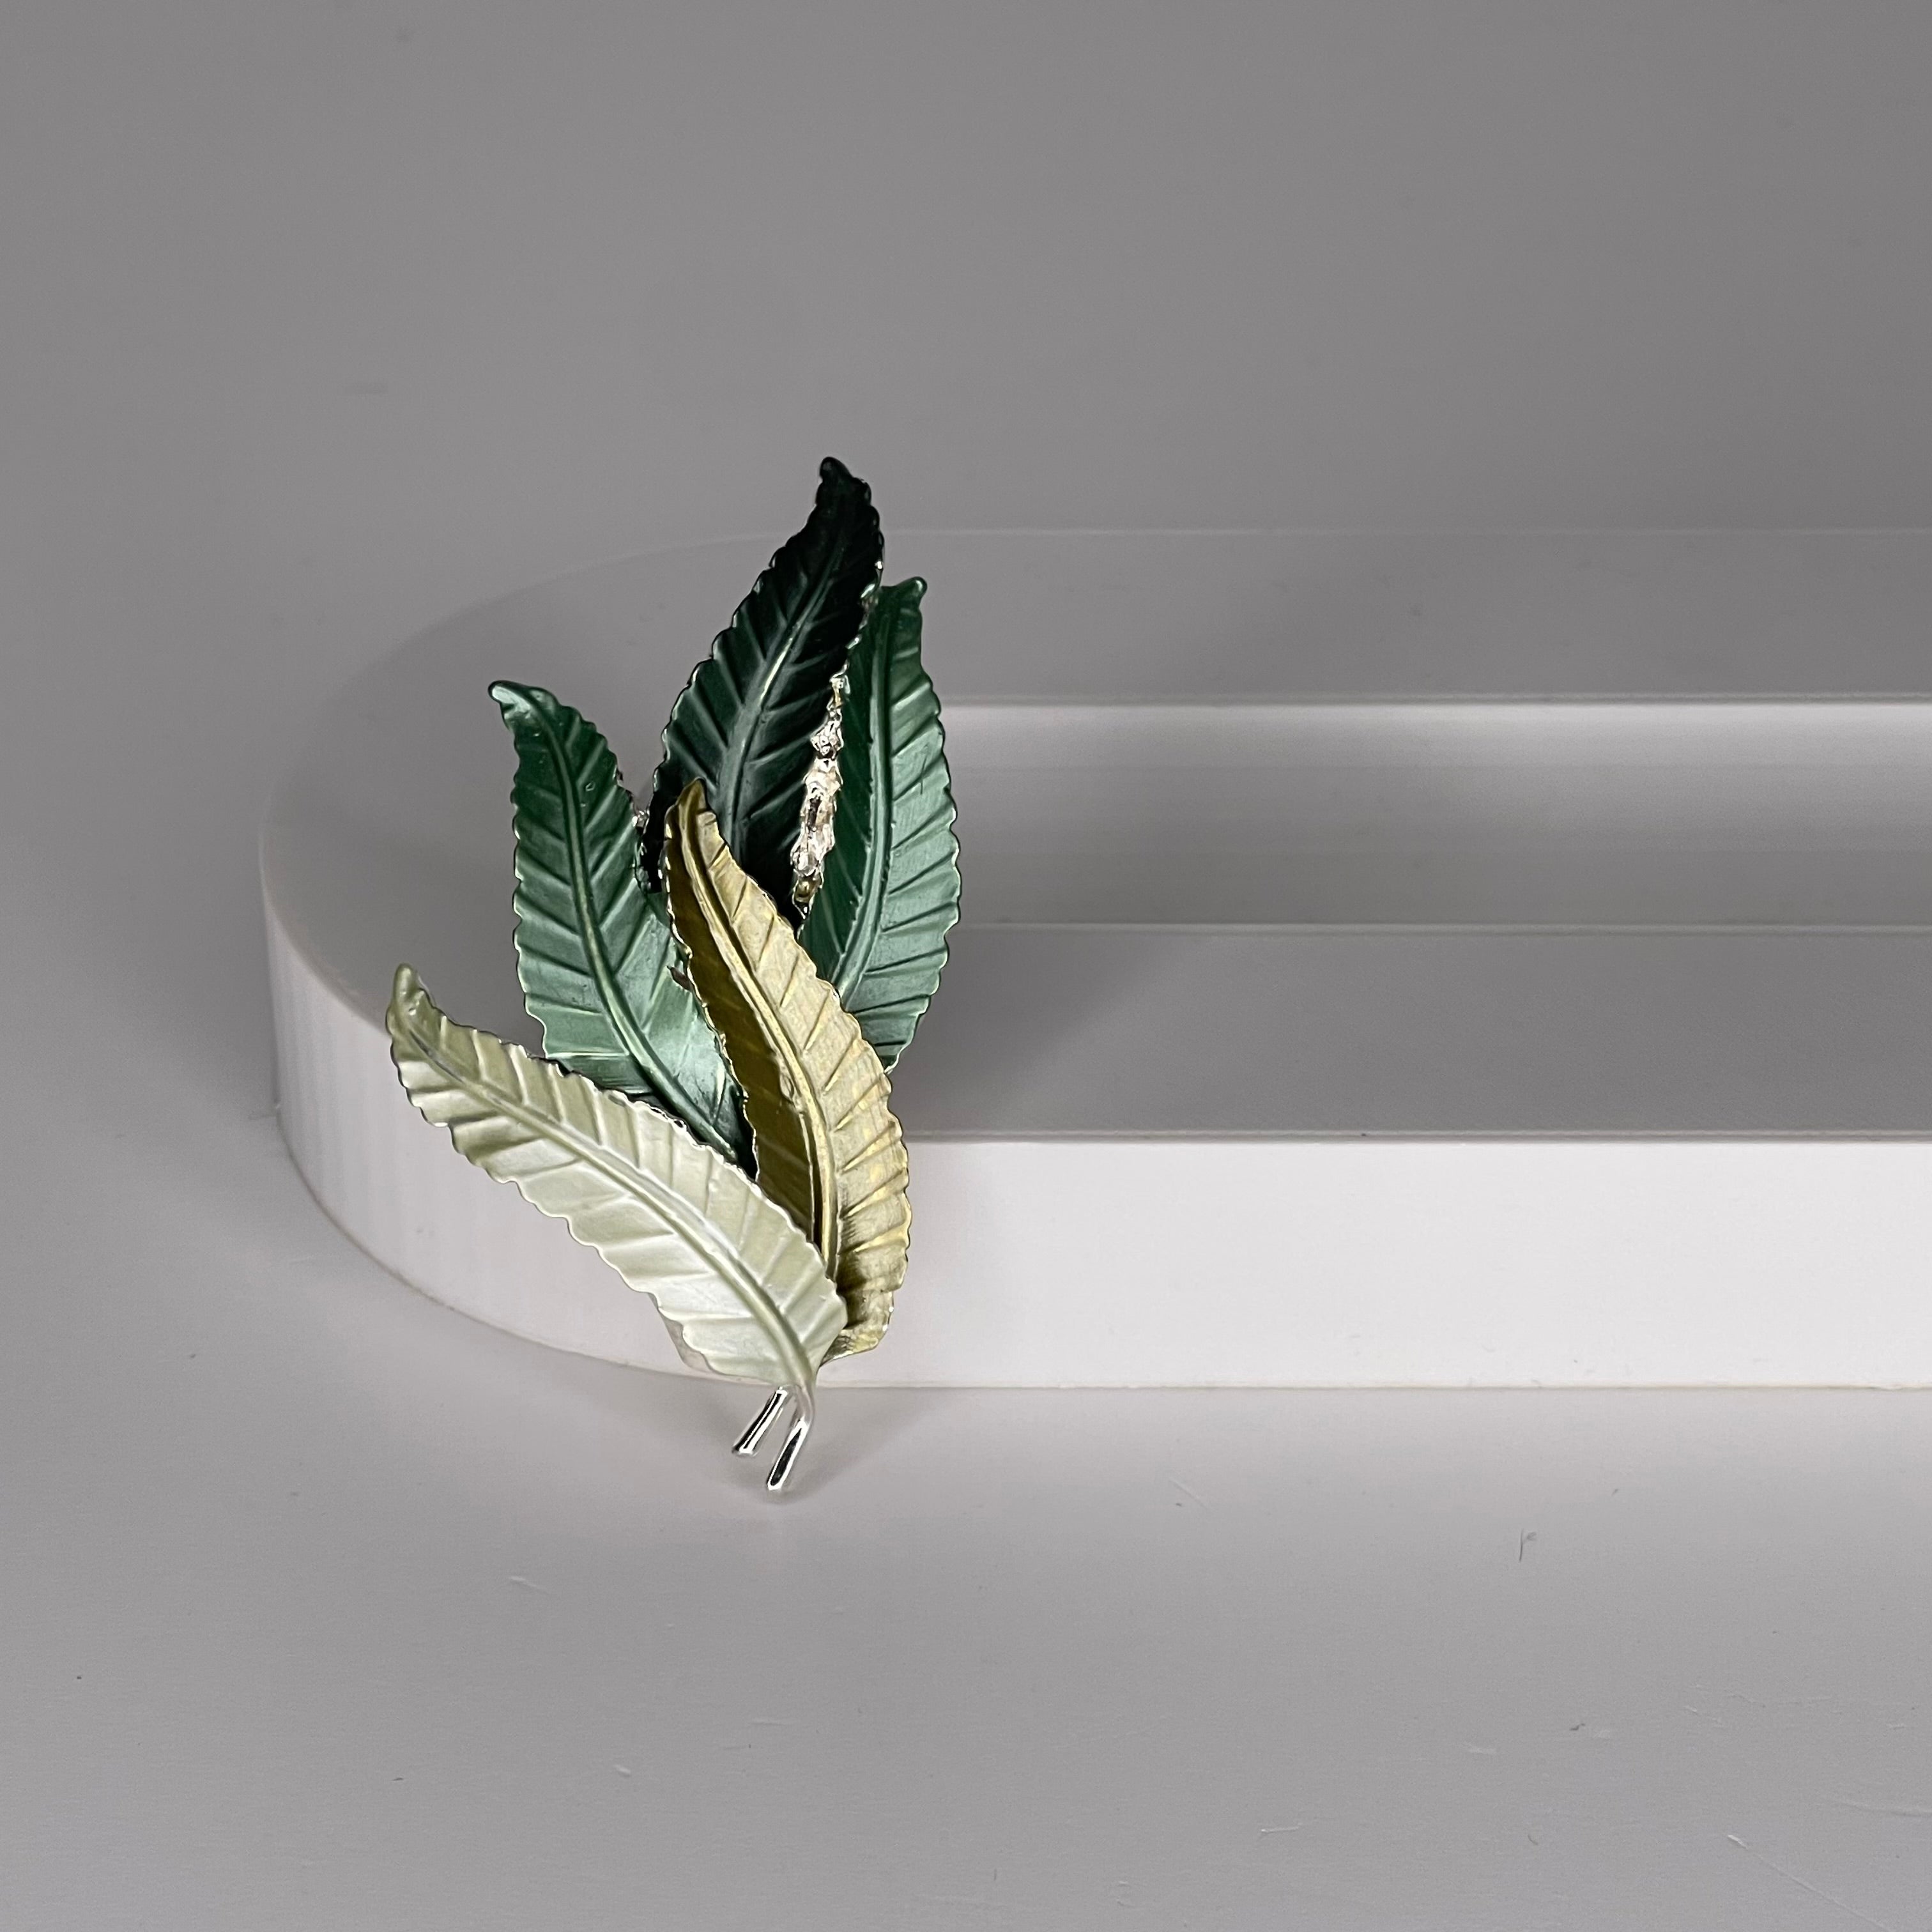 Magnetic brooch & scarf clip  - 'leaf' design in shades of different greens and shiny silver